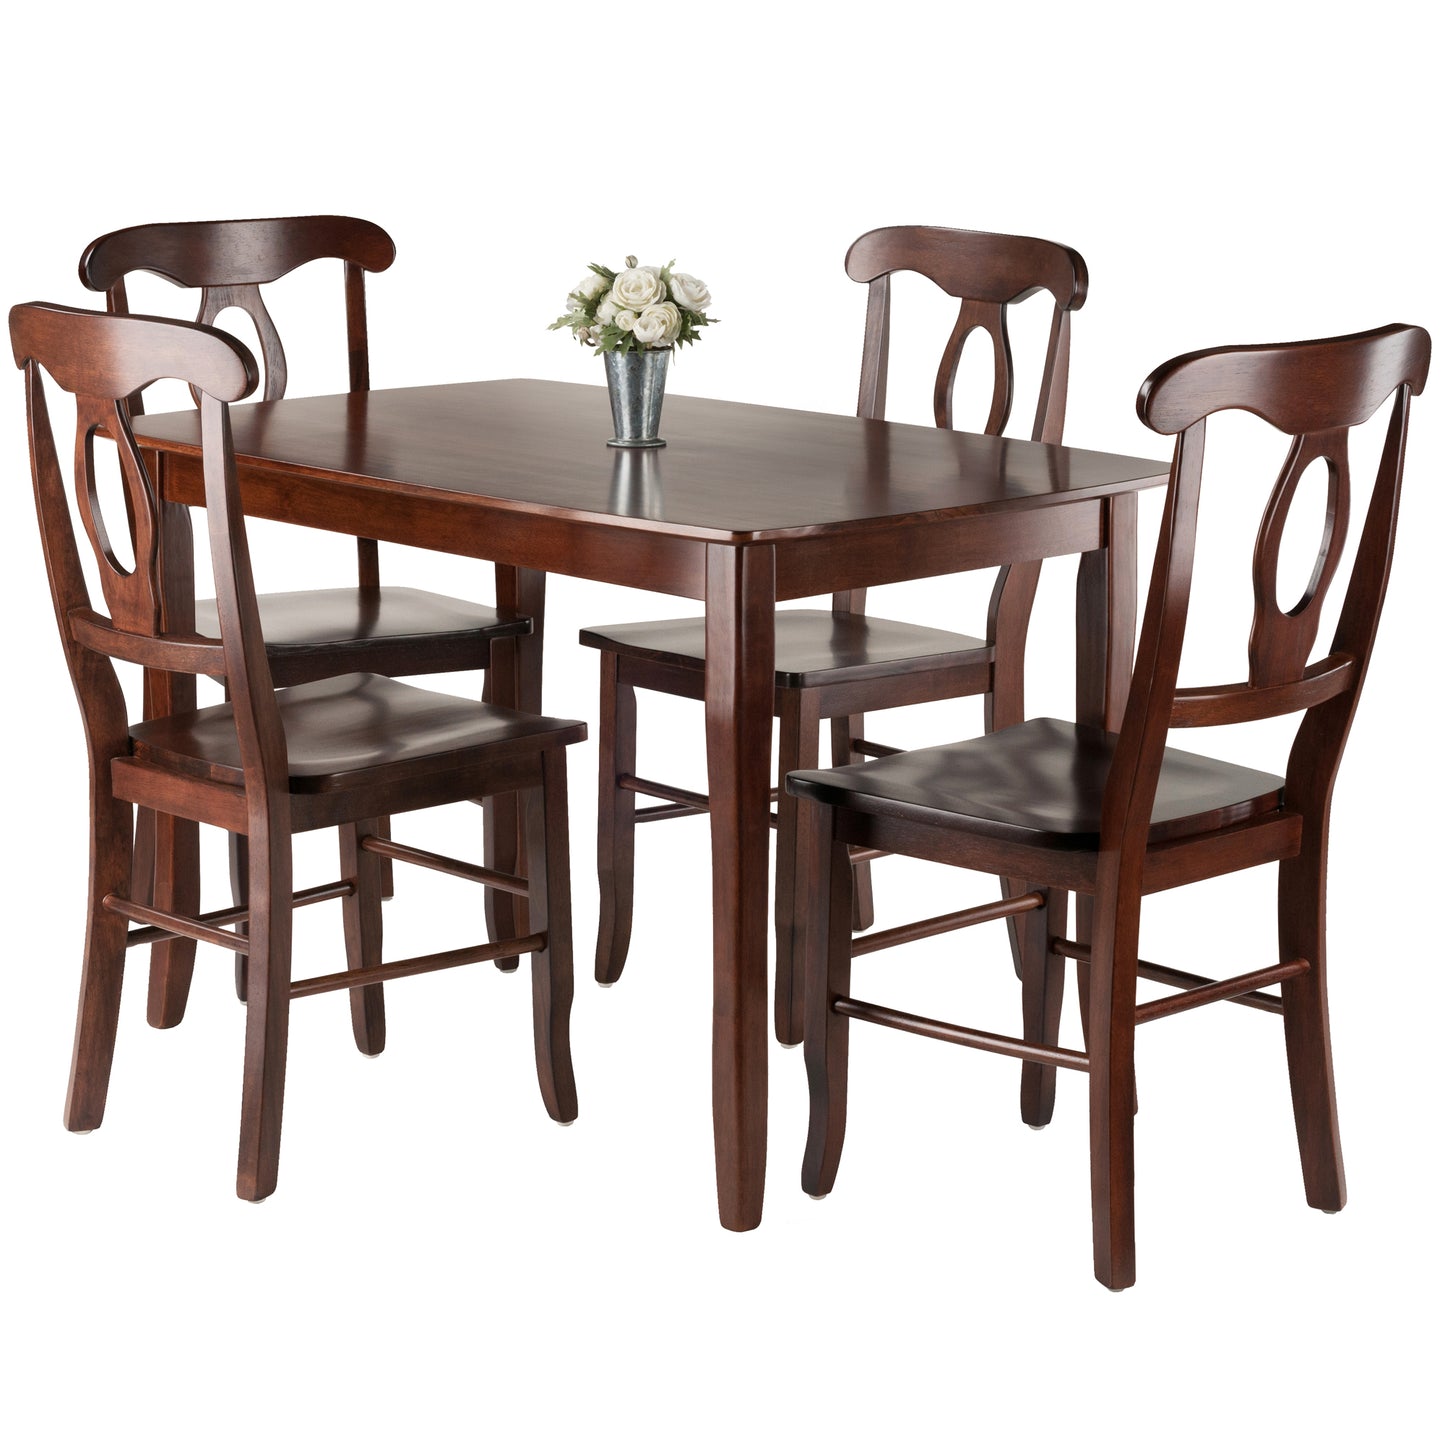 Inglewood 5-Pc Dining Table with Key Hole Back Chairs, Walnut